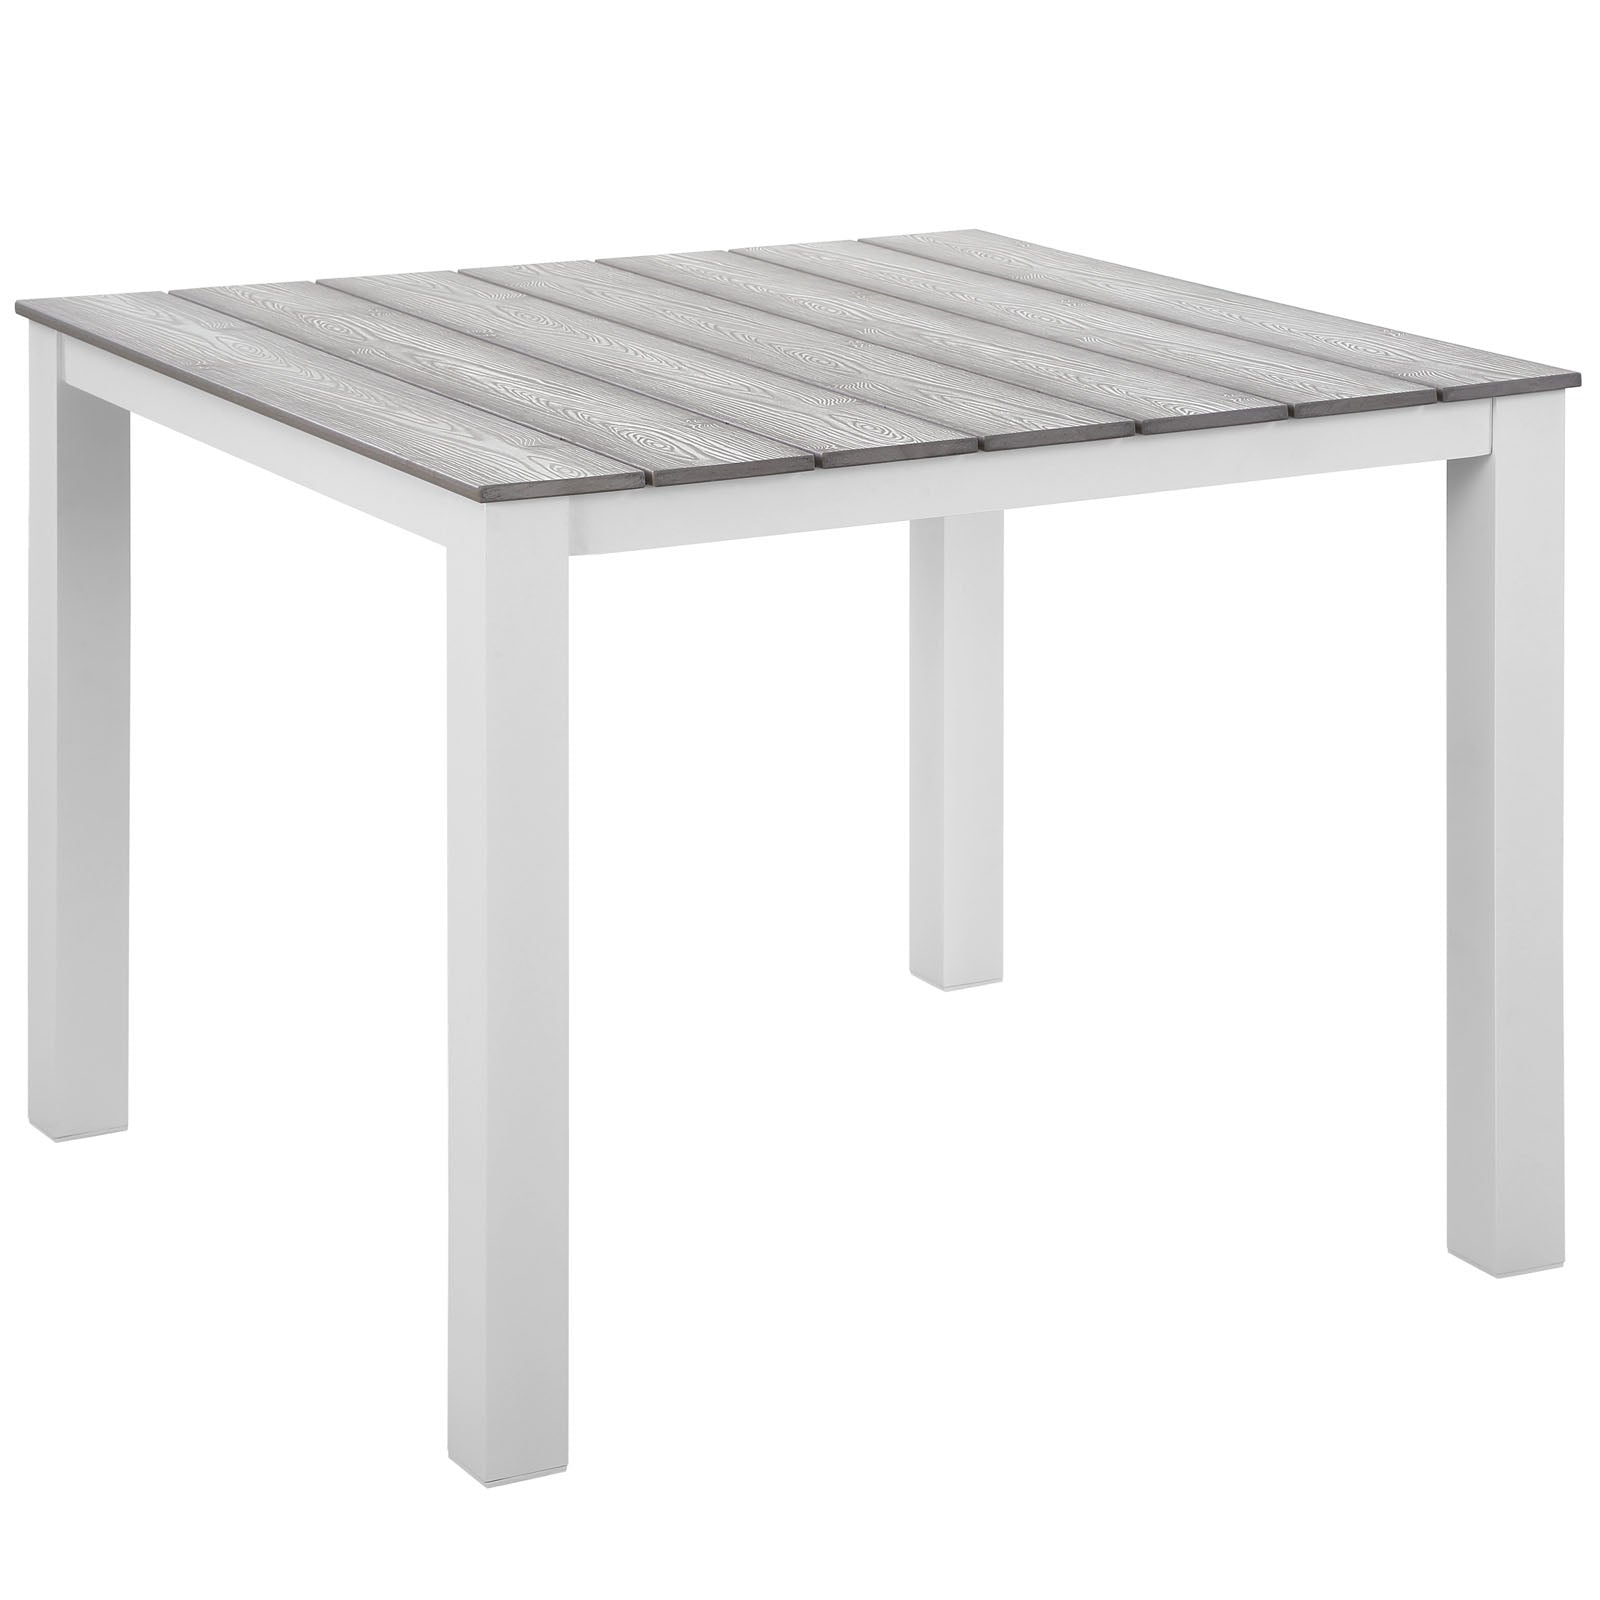 Modway Outdoor Dining Sets - Maine 3 Piece Outdoor Patio Dining Set White Light Gray